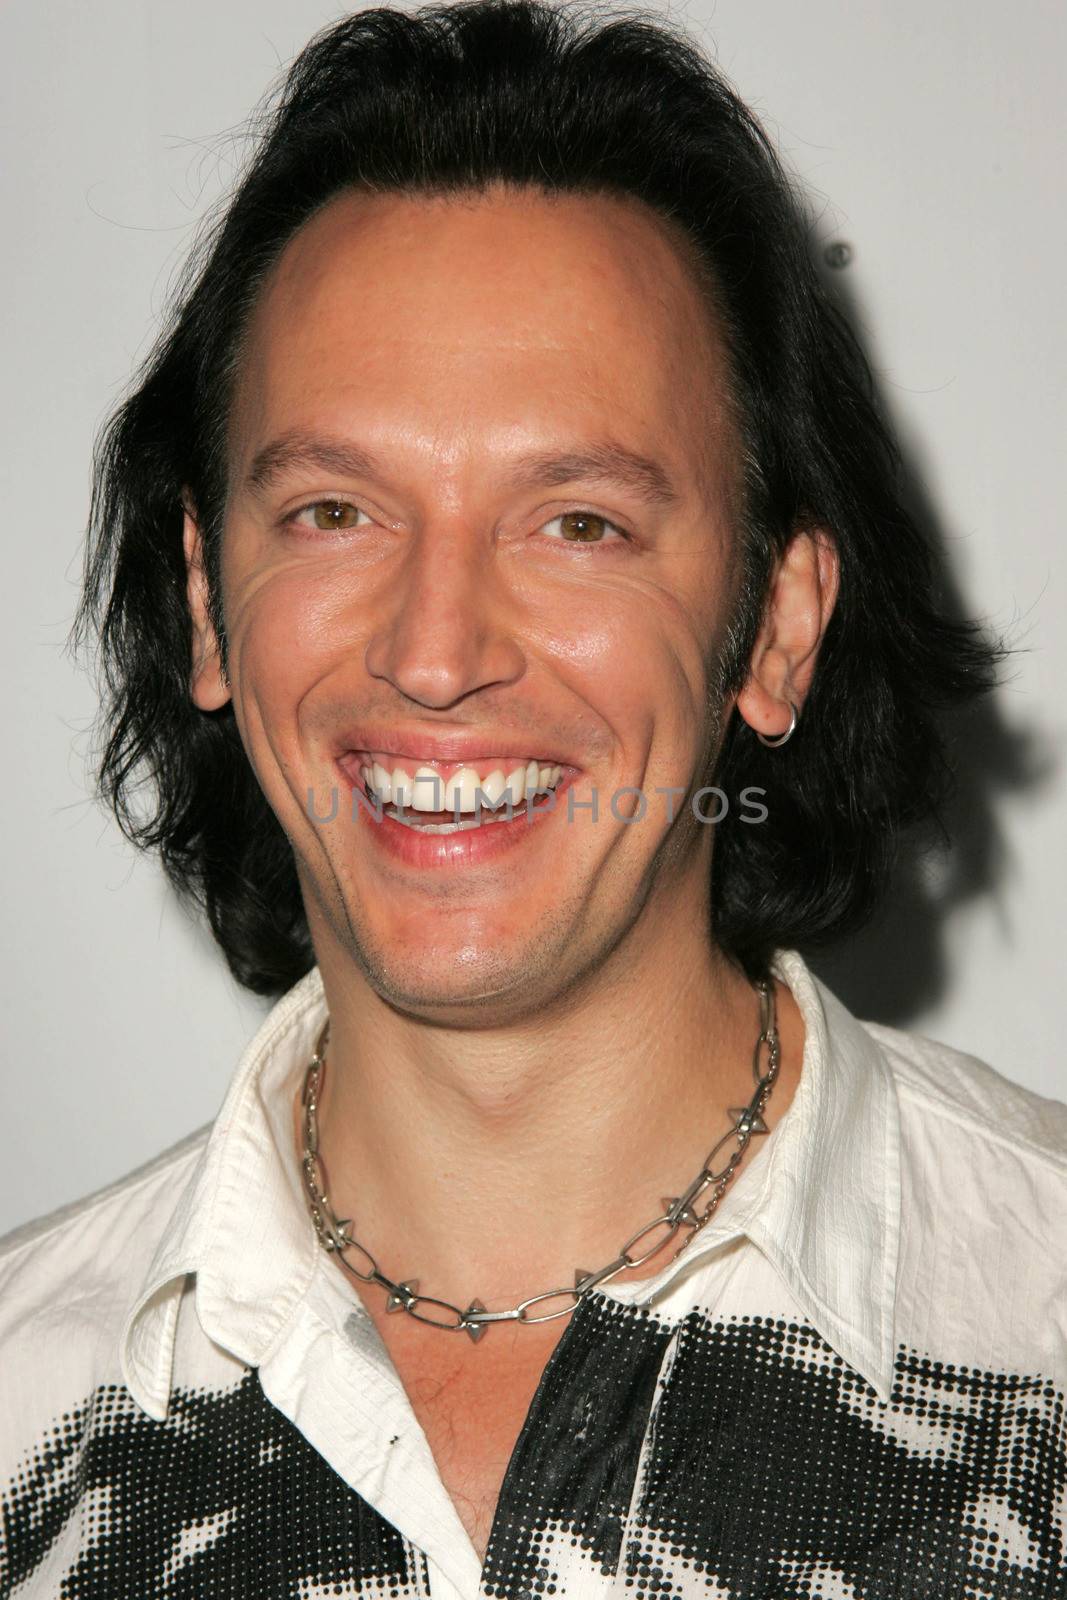 Steve Valentine at the In Touch Presents Pets And Their Stars Party, Cabana Club, Hollywood, CA 09-21-05